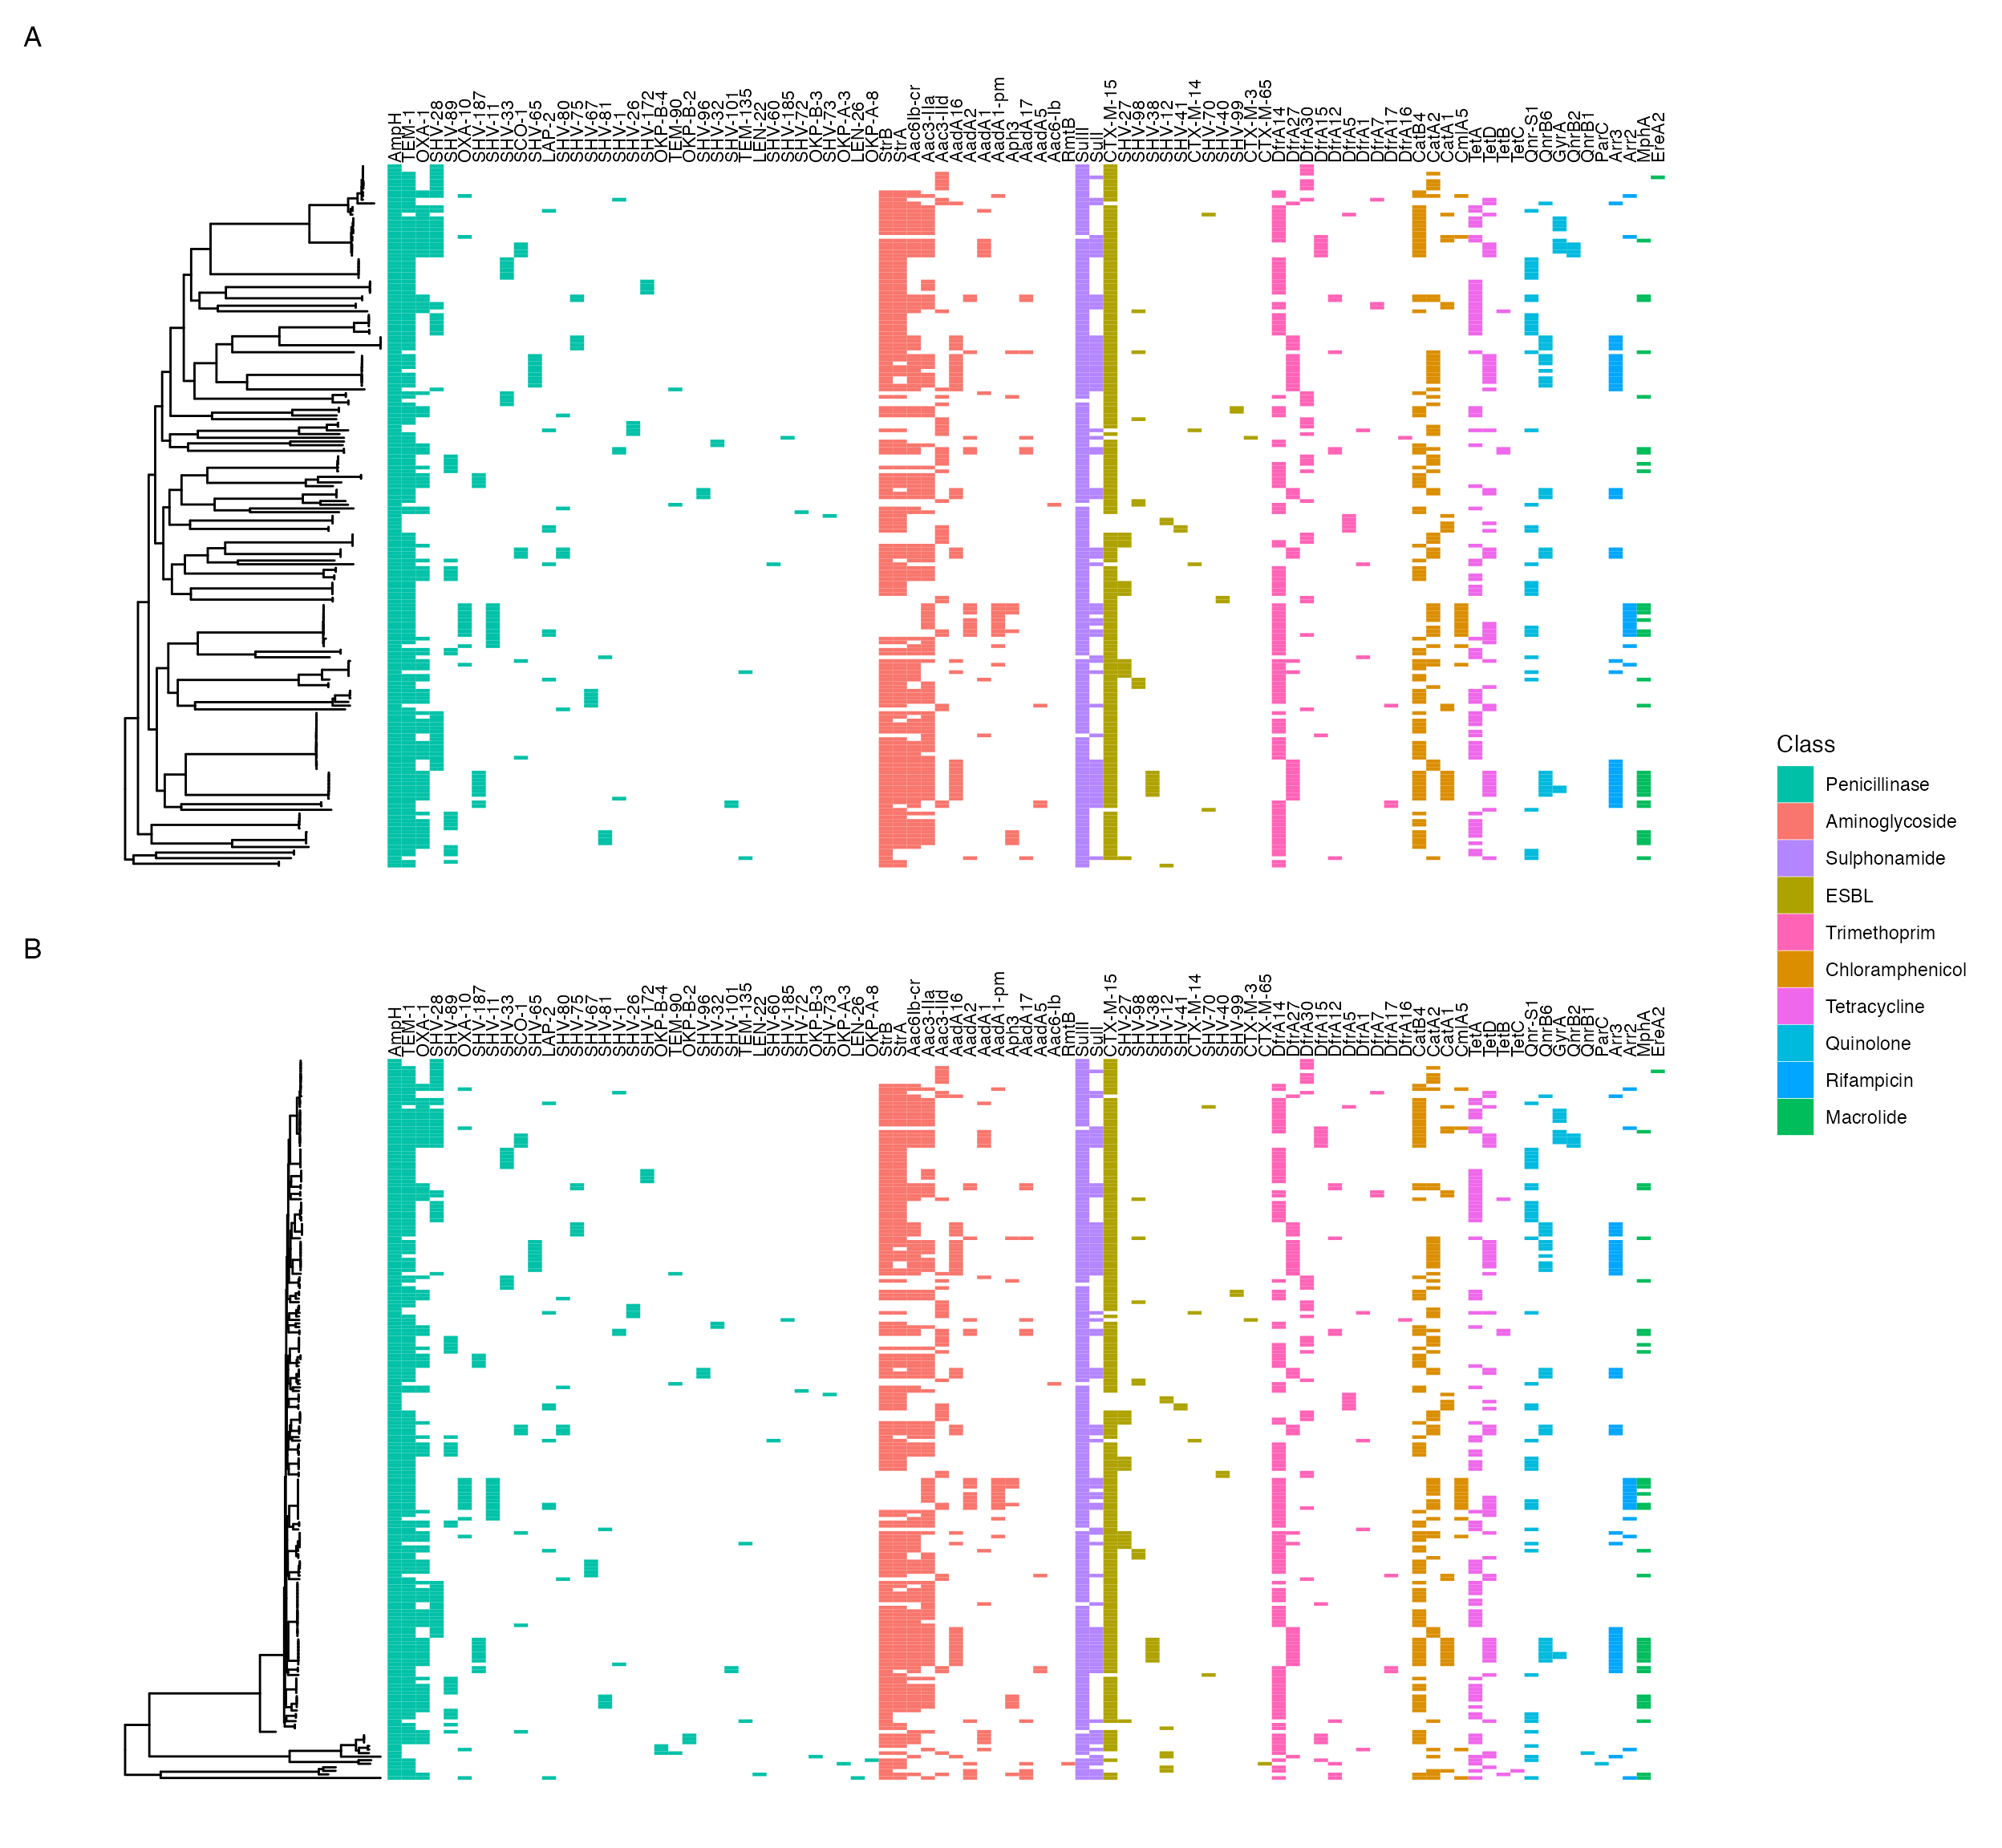 Presence of ARIBA-identified AMR genes mapped back to phylogeny for (A) KPI isolates only (B) all samples. Some lineage association of AMR genes is apparent.